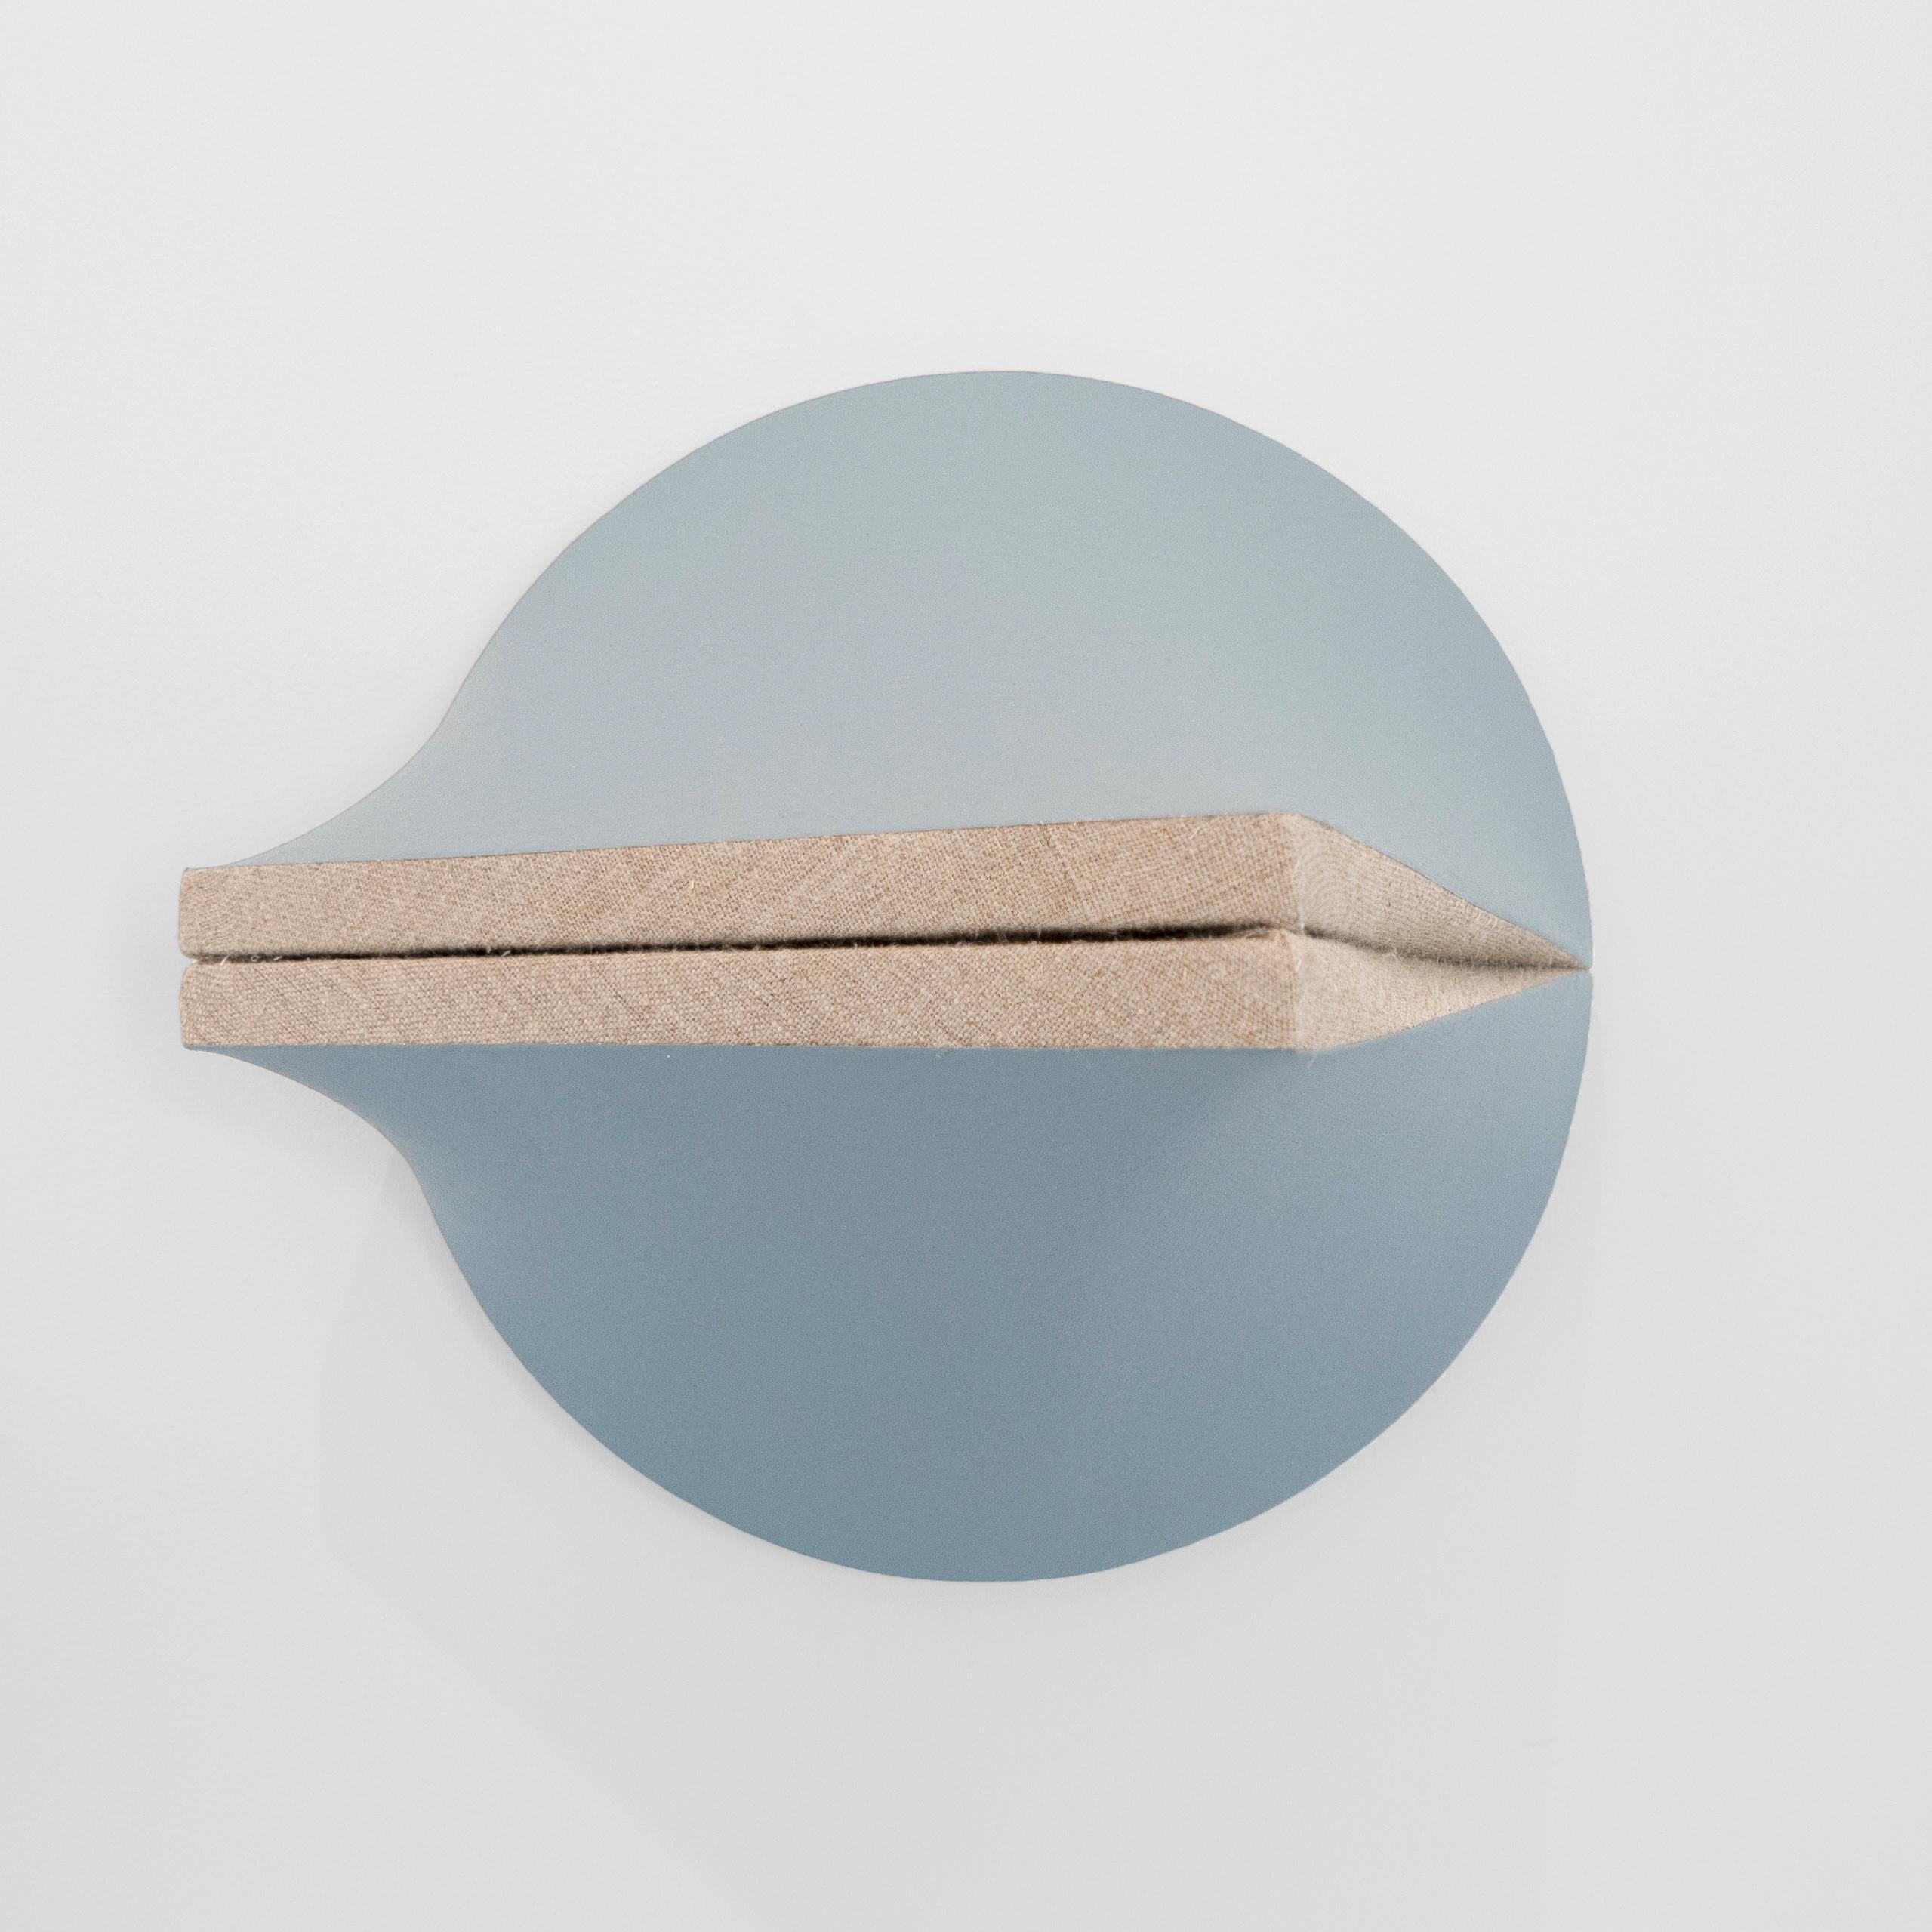 Jan Maarten Voskuil Abstract Sculpture - Pointing Out As Blue Grey